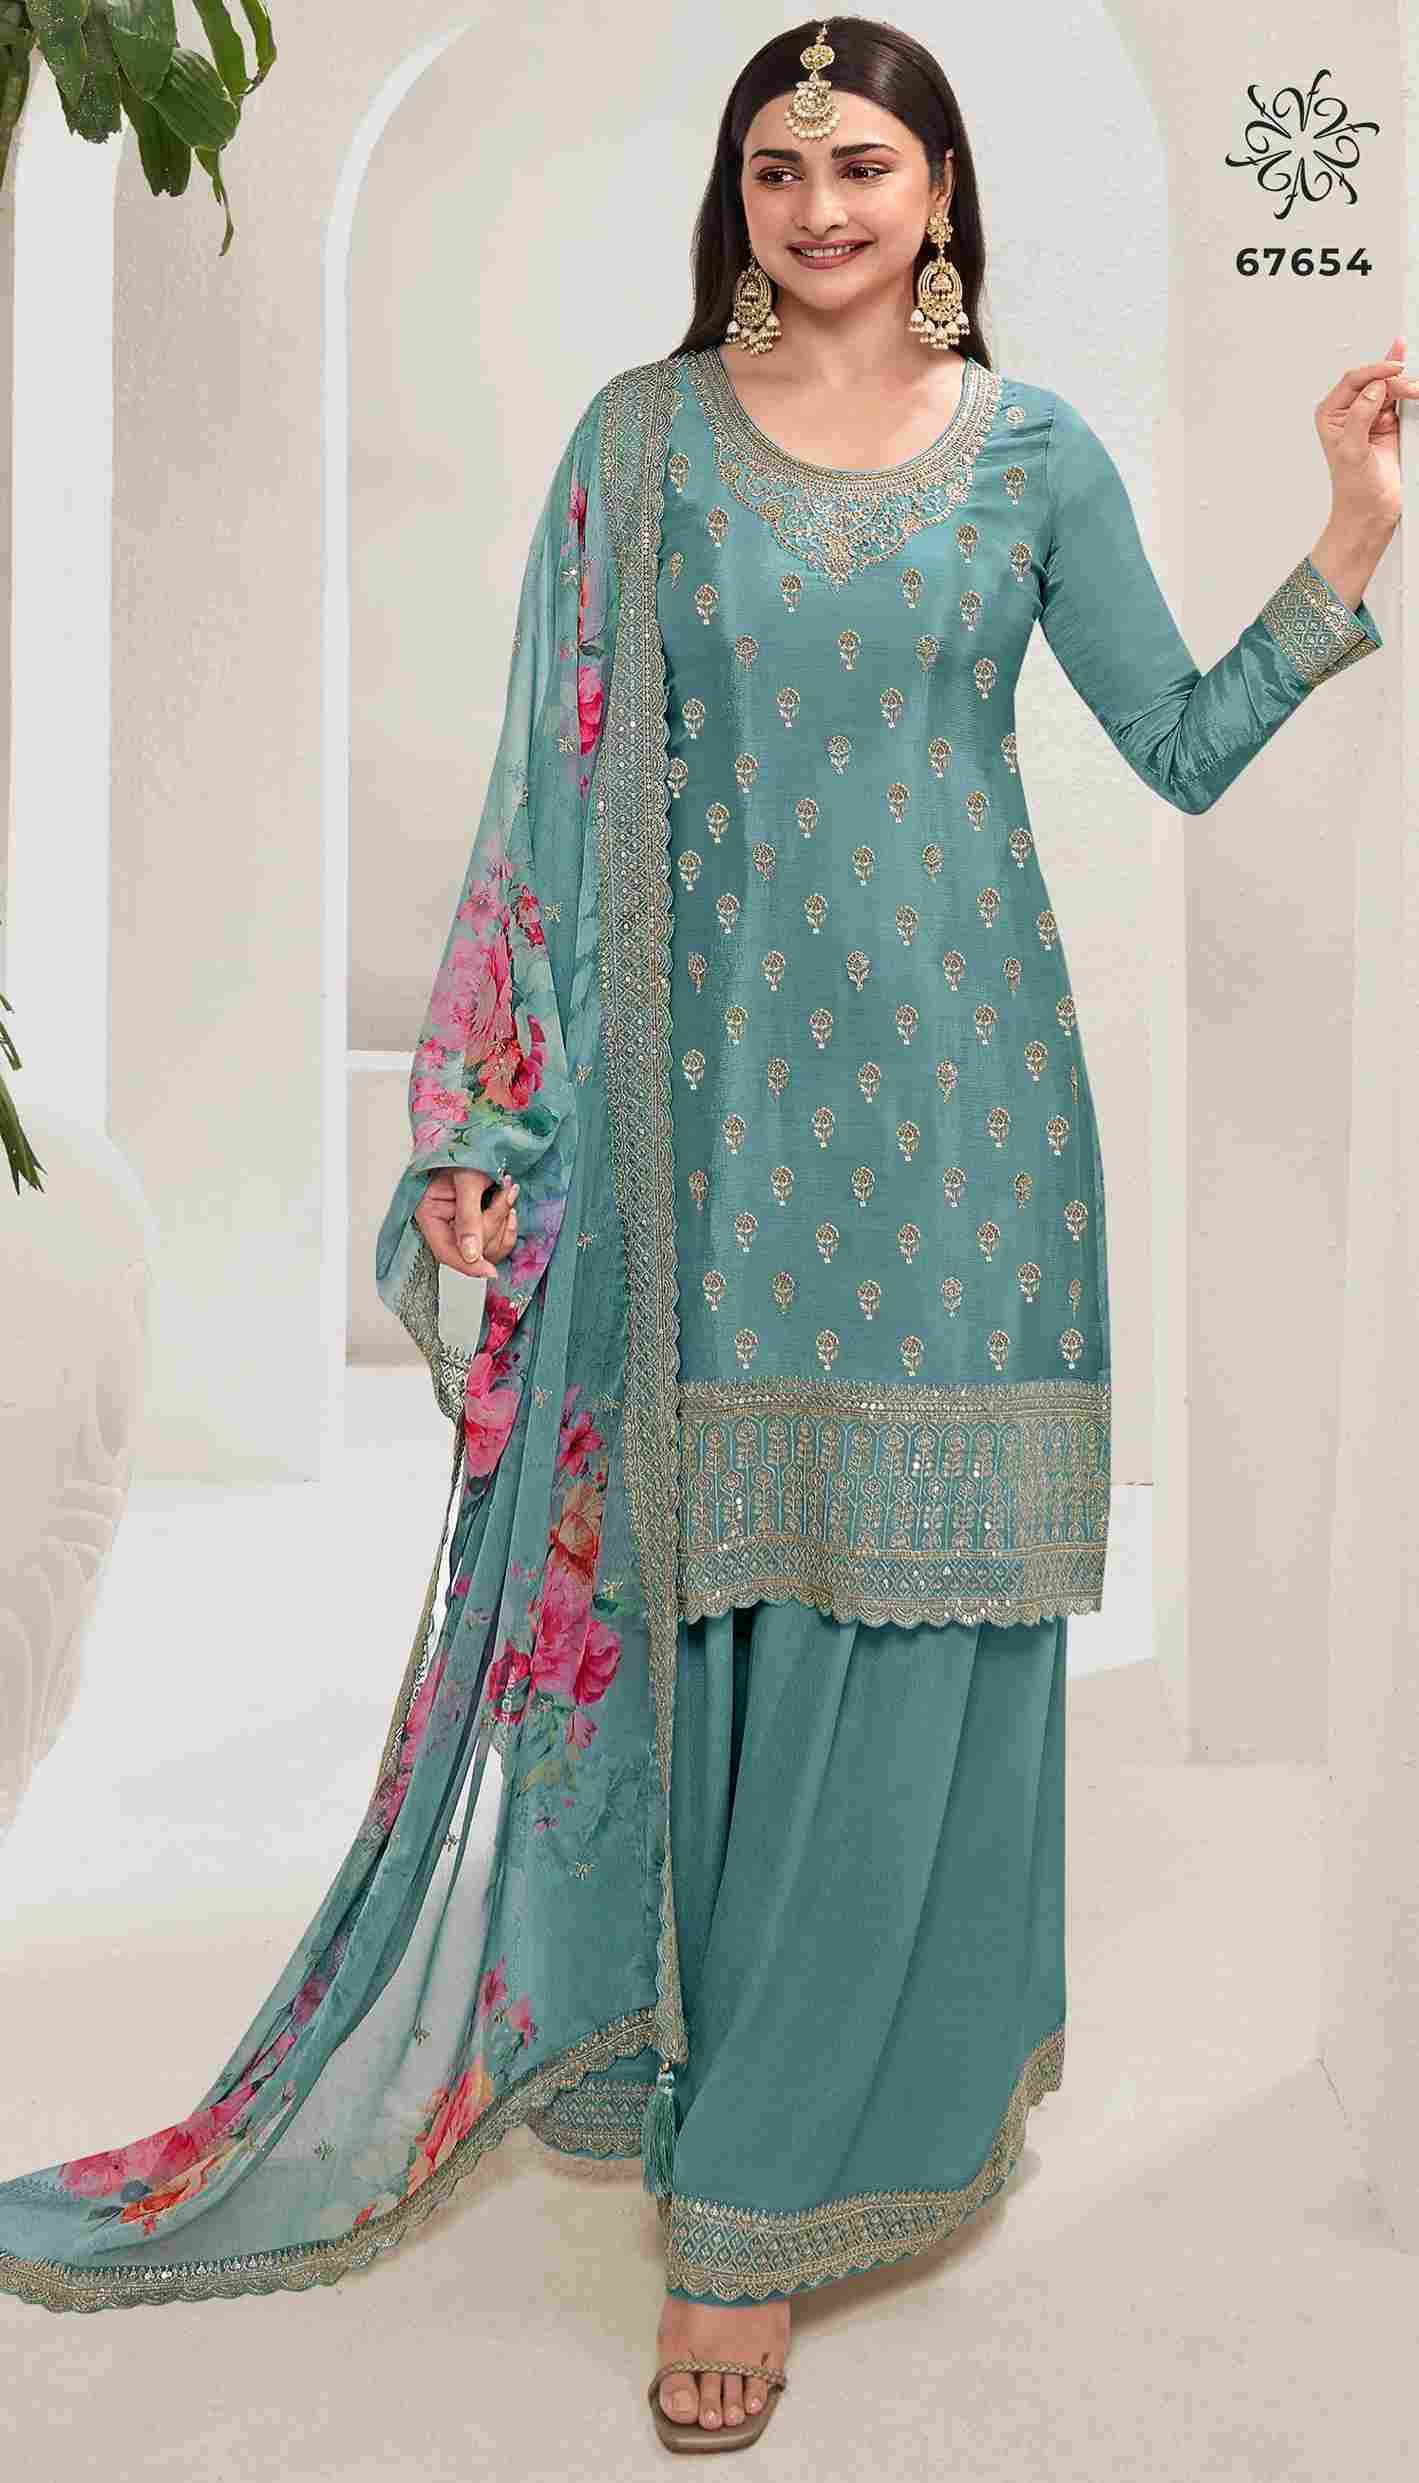 Shalini By Vinay Fashion 67651 To 67656 Series Beautiful Stylish Sharara Suits Fancy Colorful Casual Wear & Ethnic Wear & Ready To Wear Chinnon Dresses At Wholesale Price